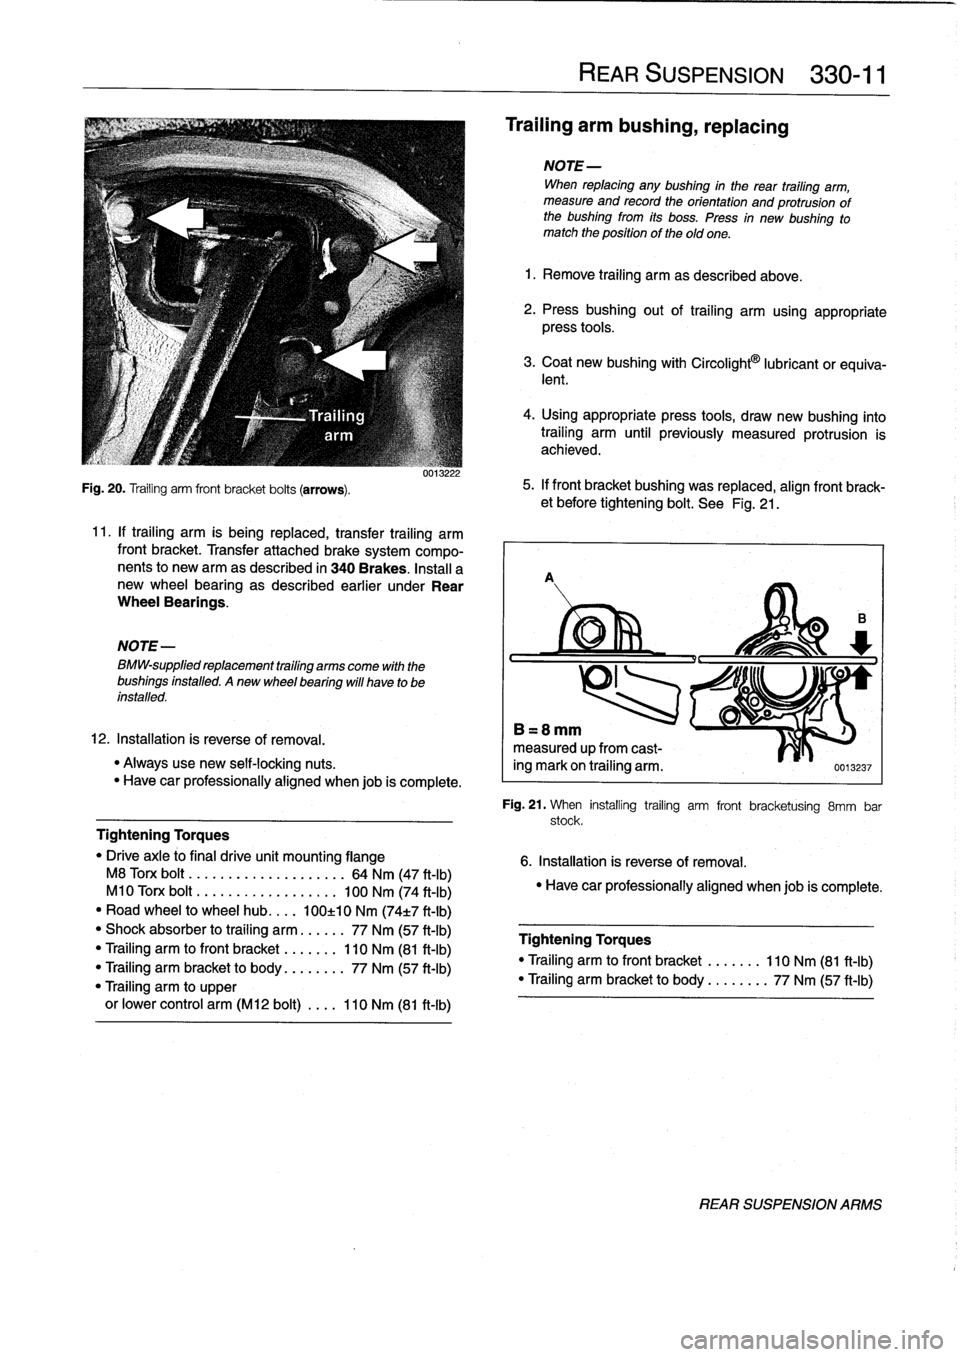 BMW 323i 1997 E36 Owners Guide 
Fig
.
20
.
Trailing
arm
front
bracket
bolts
(arrows)
.

NOTE-

BMW-supplied
replacement
trailing
arms
come
with
the
bushings
installed
.
Anew
wheel
bearing
will
have
to
be
installed
.

0013222

11
.
